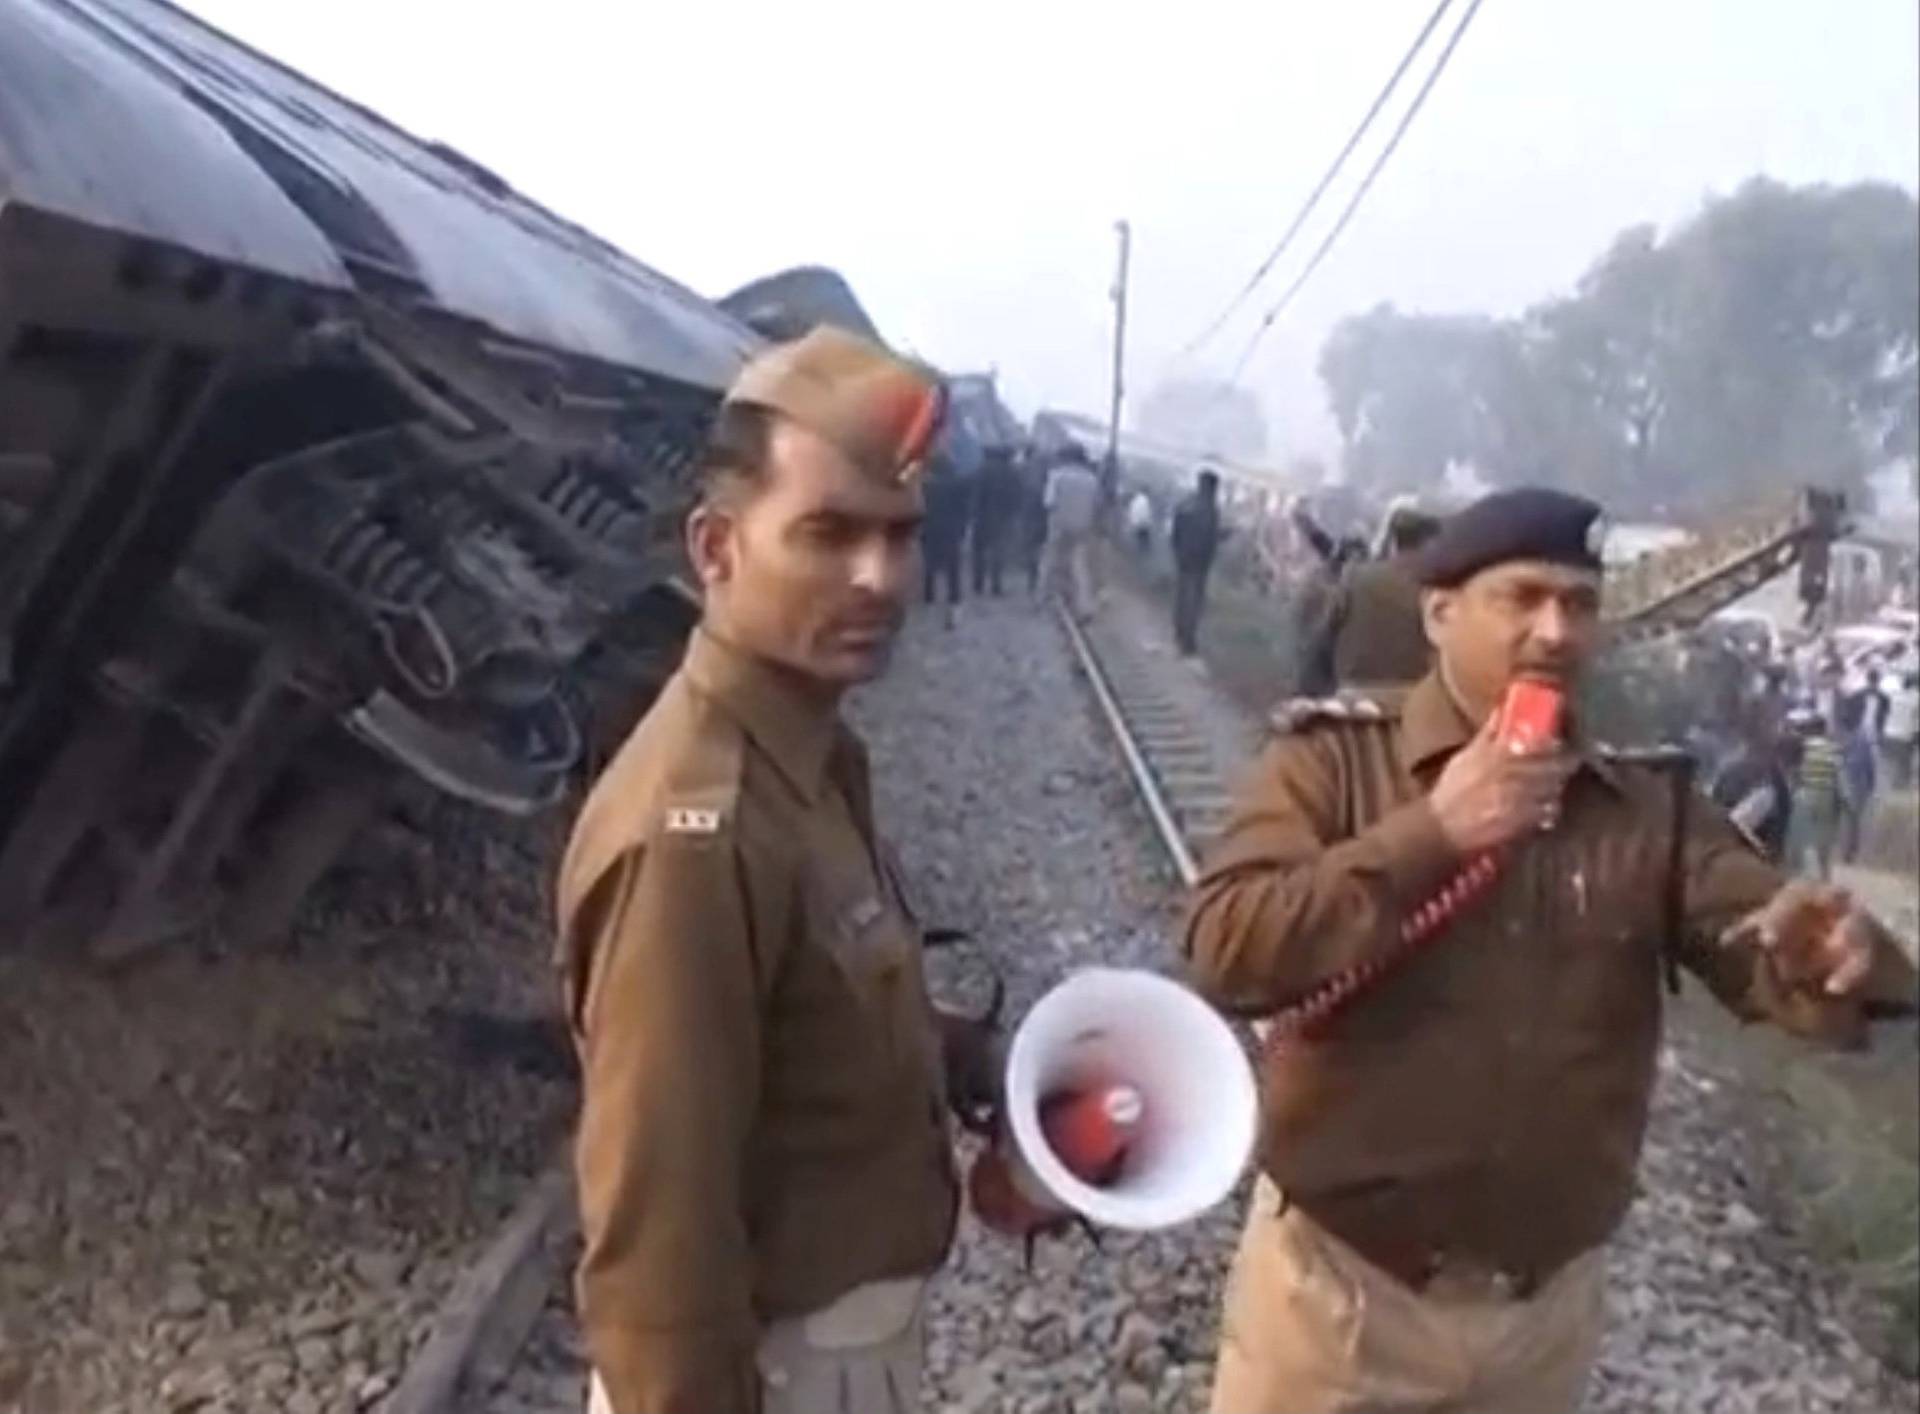 A police officer instructs people and rescuers at the site where a train derailed in Kanpur, in India's northern state of Uttar Pradesh